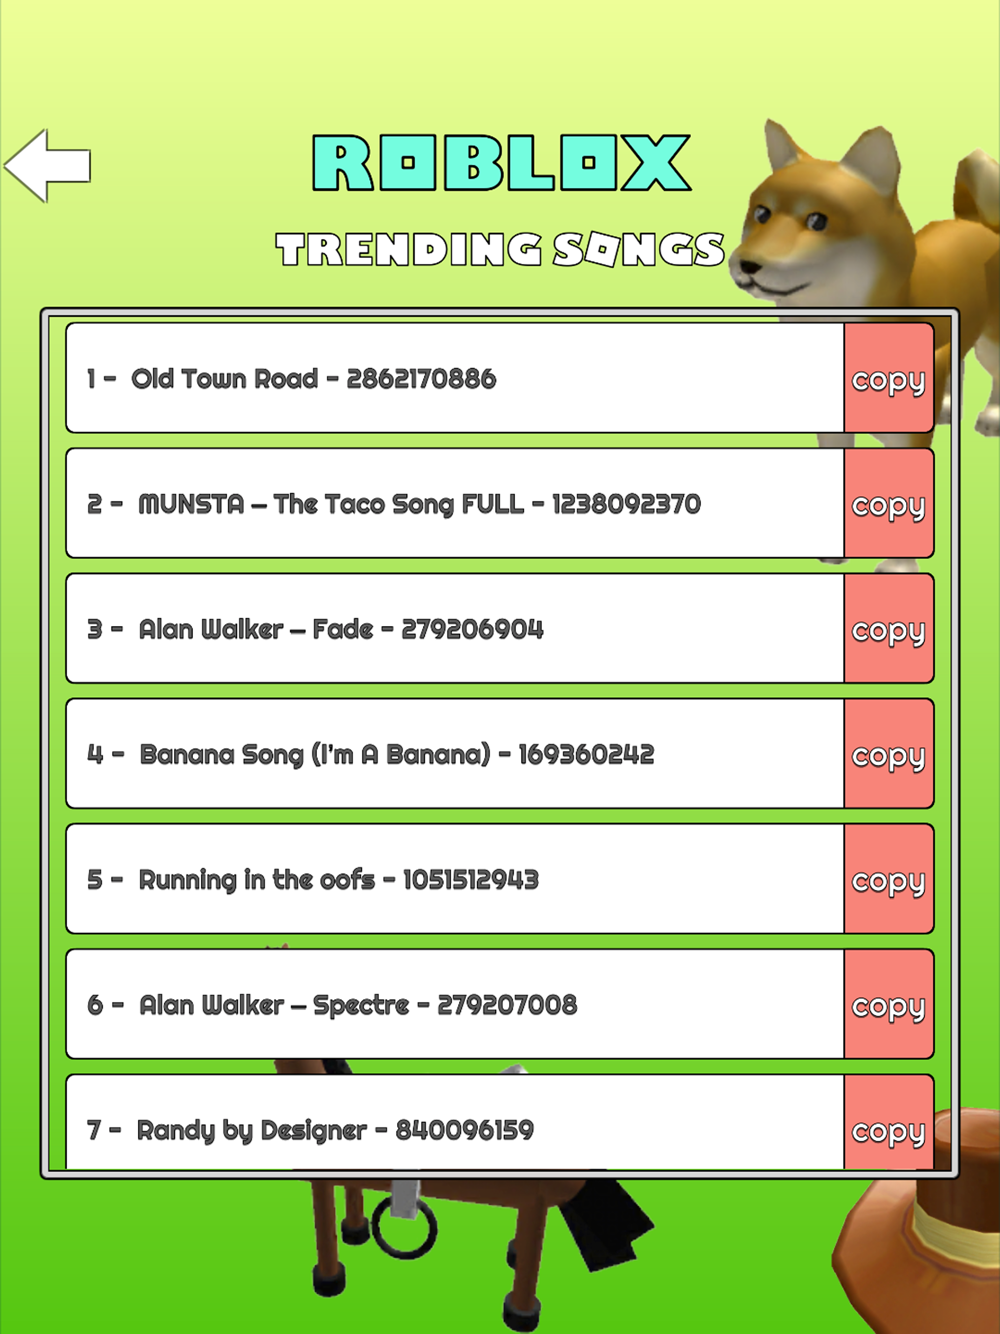 Music Codes For Roblox Robux Free Download App For Iphone Steprimo Com - old town road code for dance off on roblox